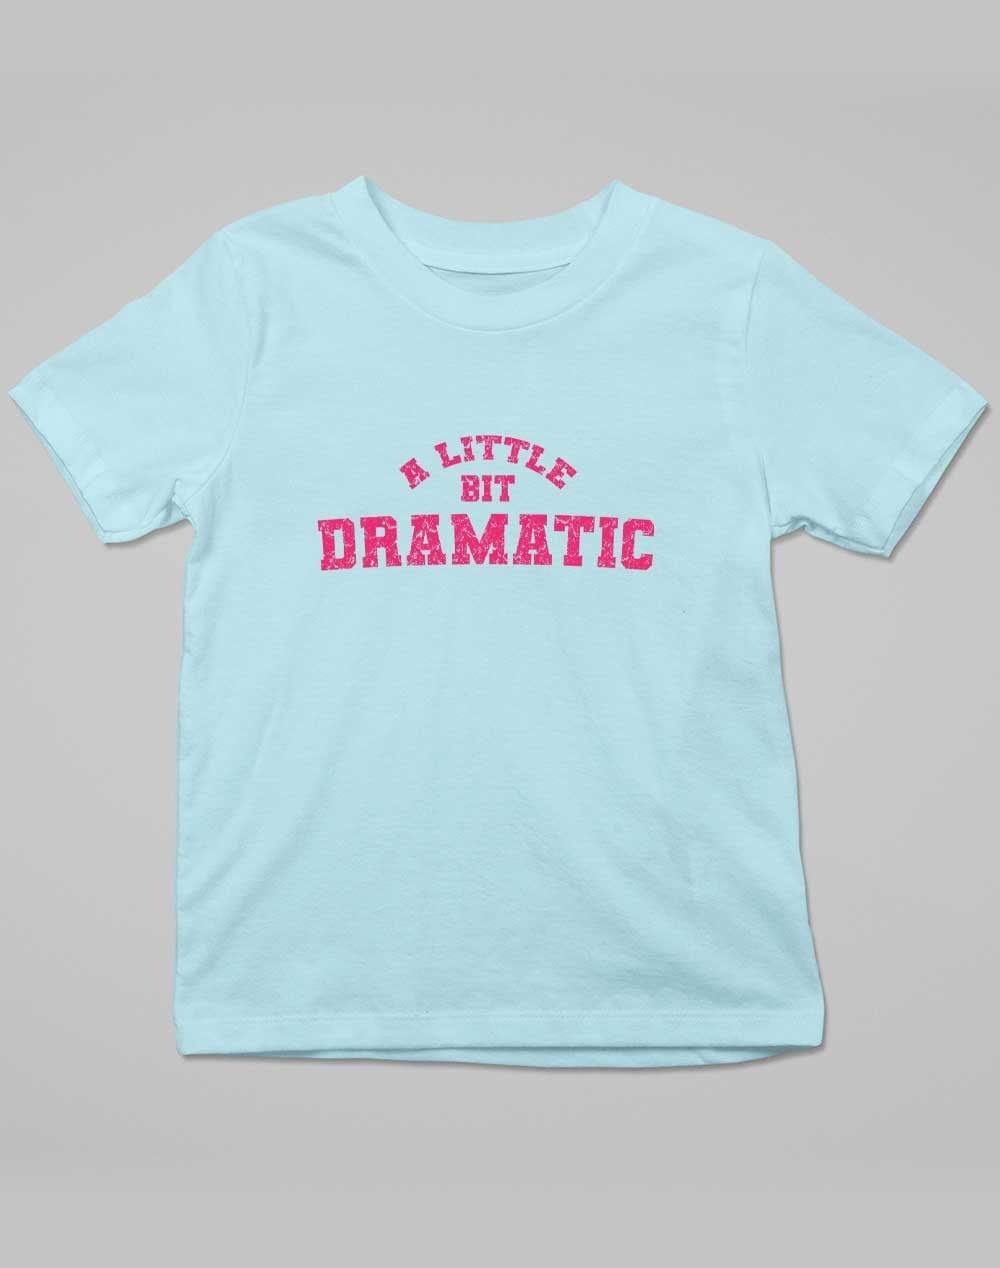 A Little Bit Dramatic Distressed Kids T-Shirt 3-4 years / Sky Blue  - Off World Tees